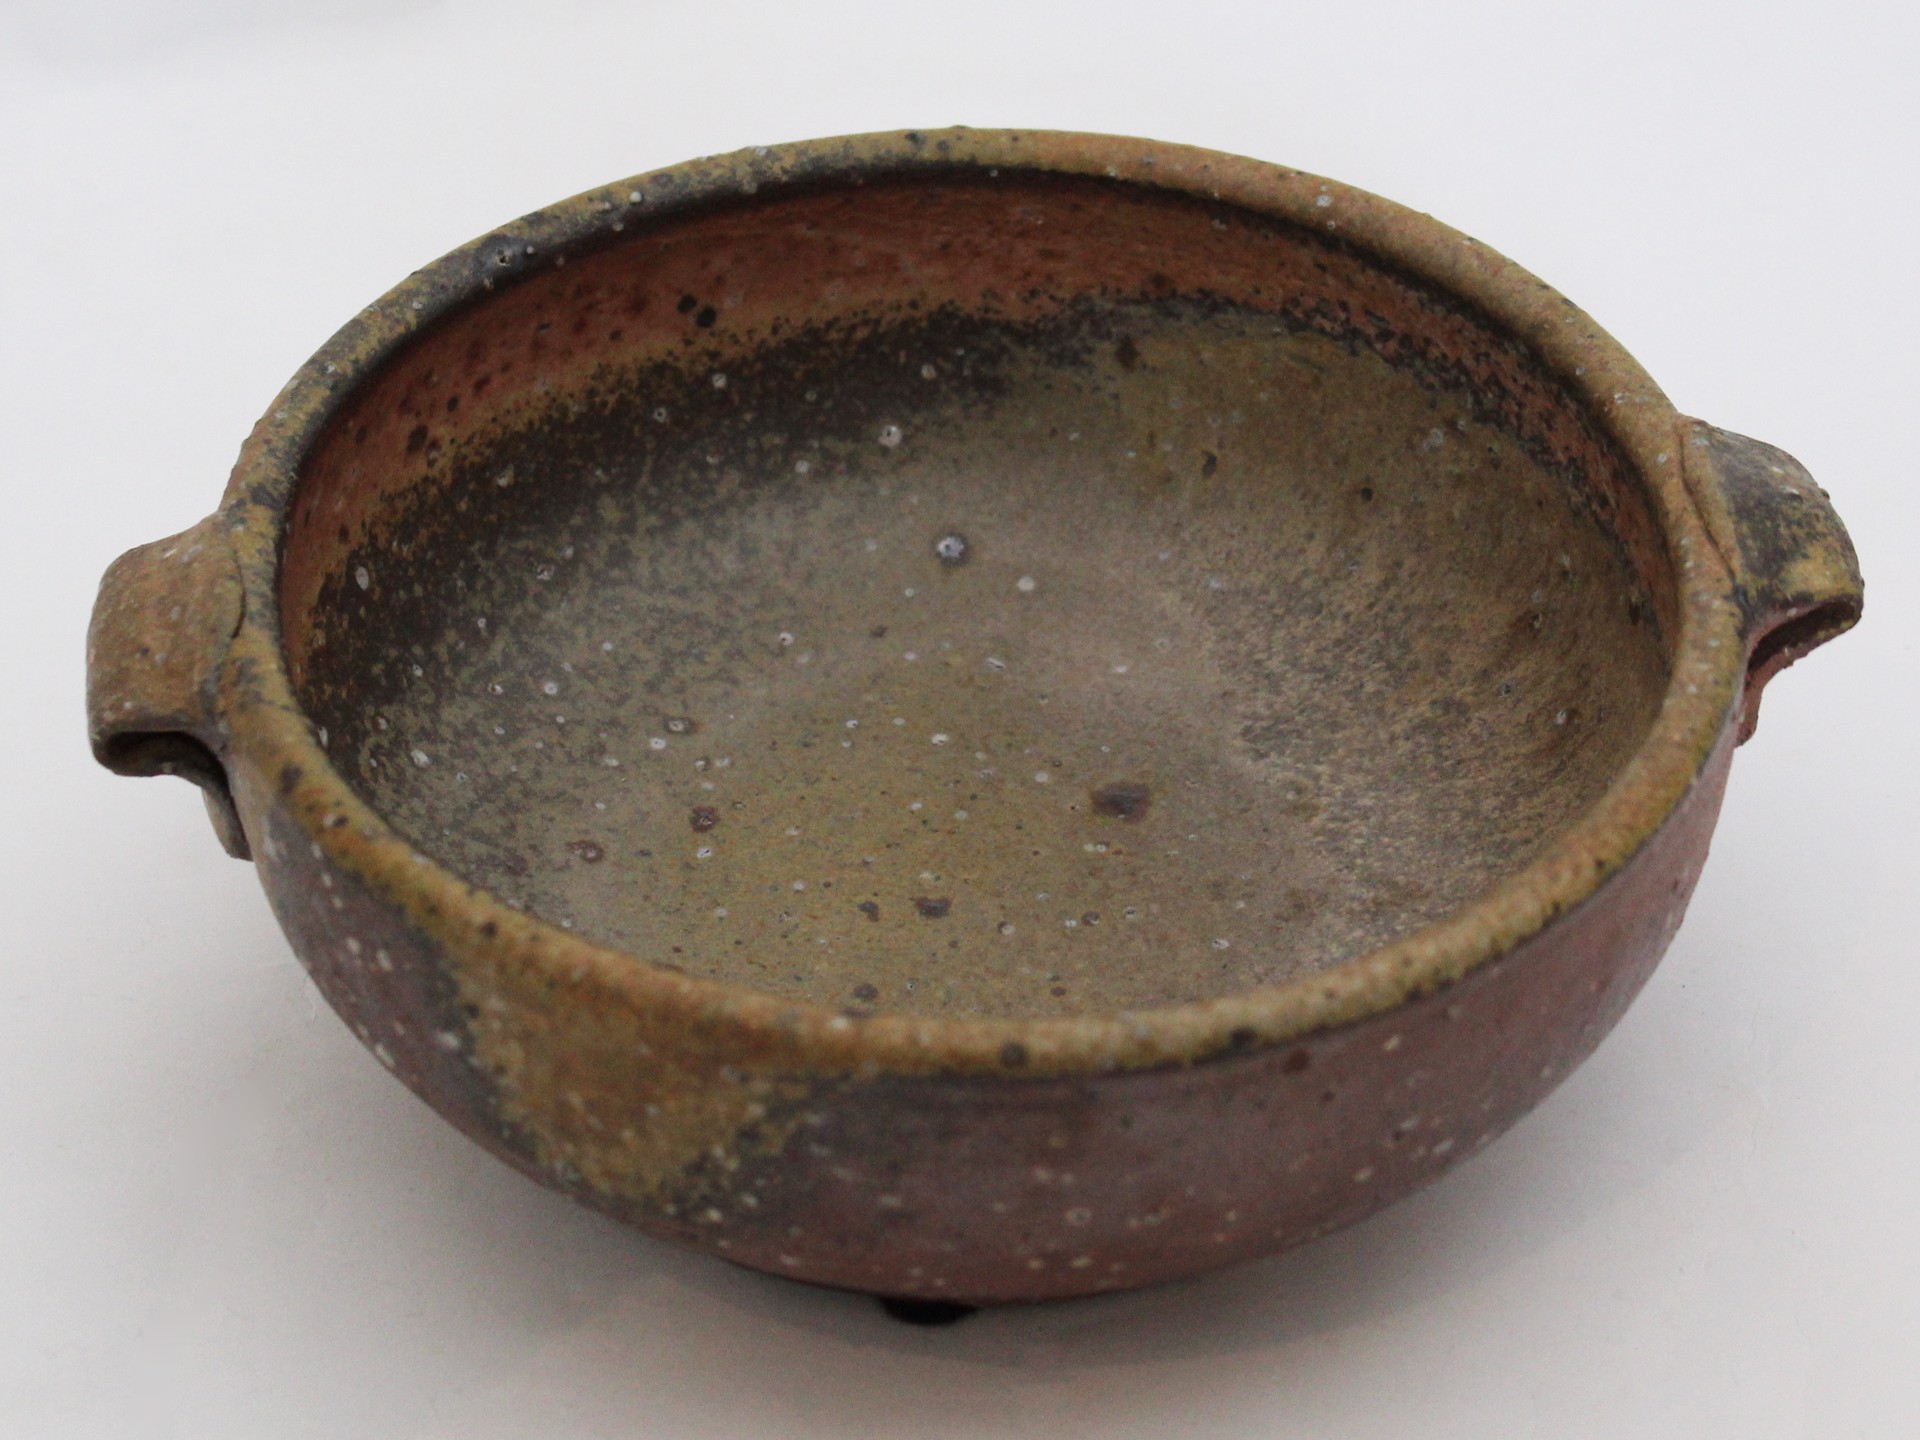 Handled Bowl (Granite Wood Fired) by Mitch Yung